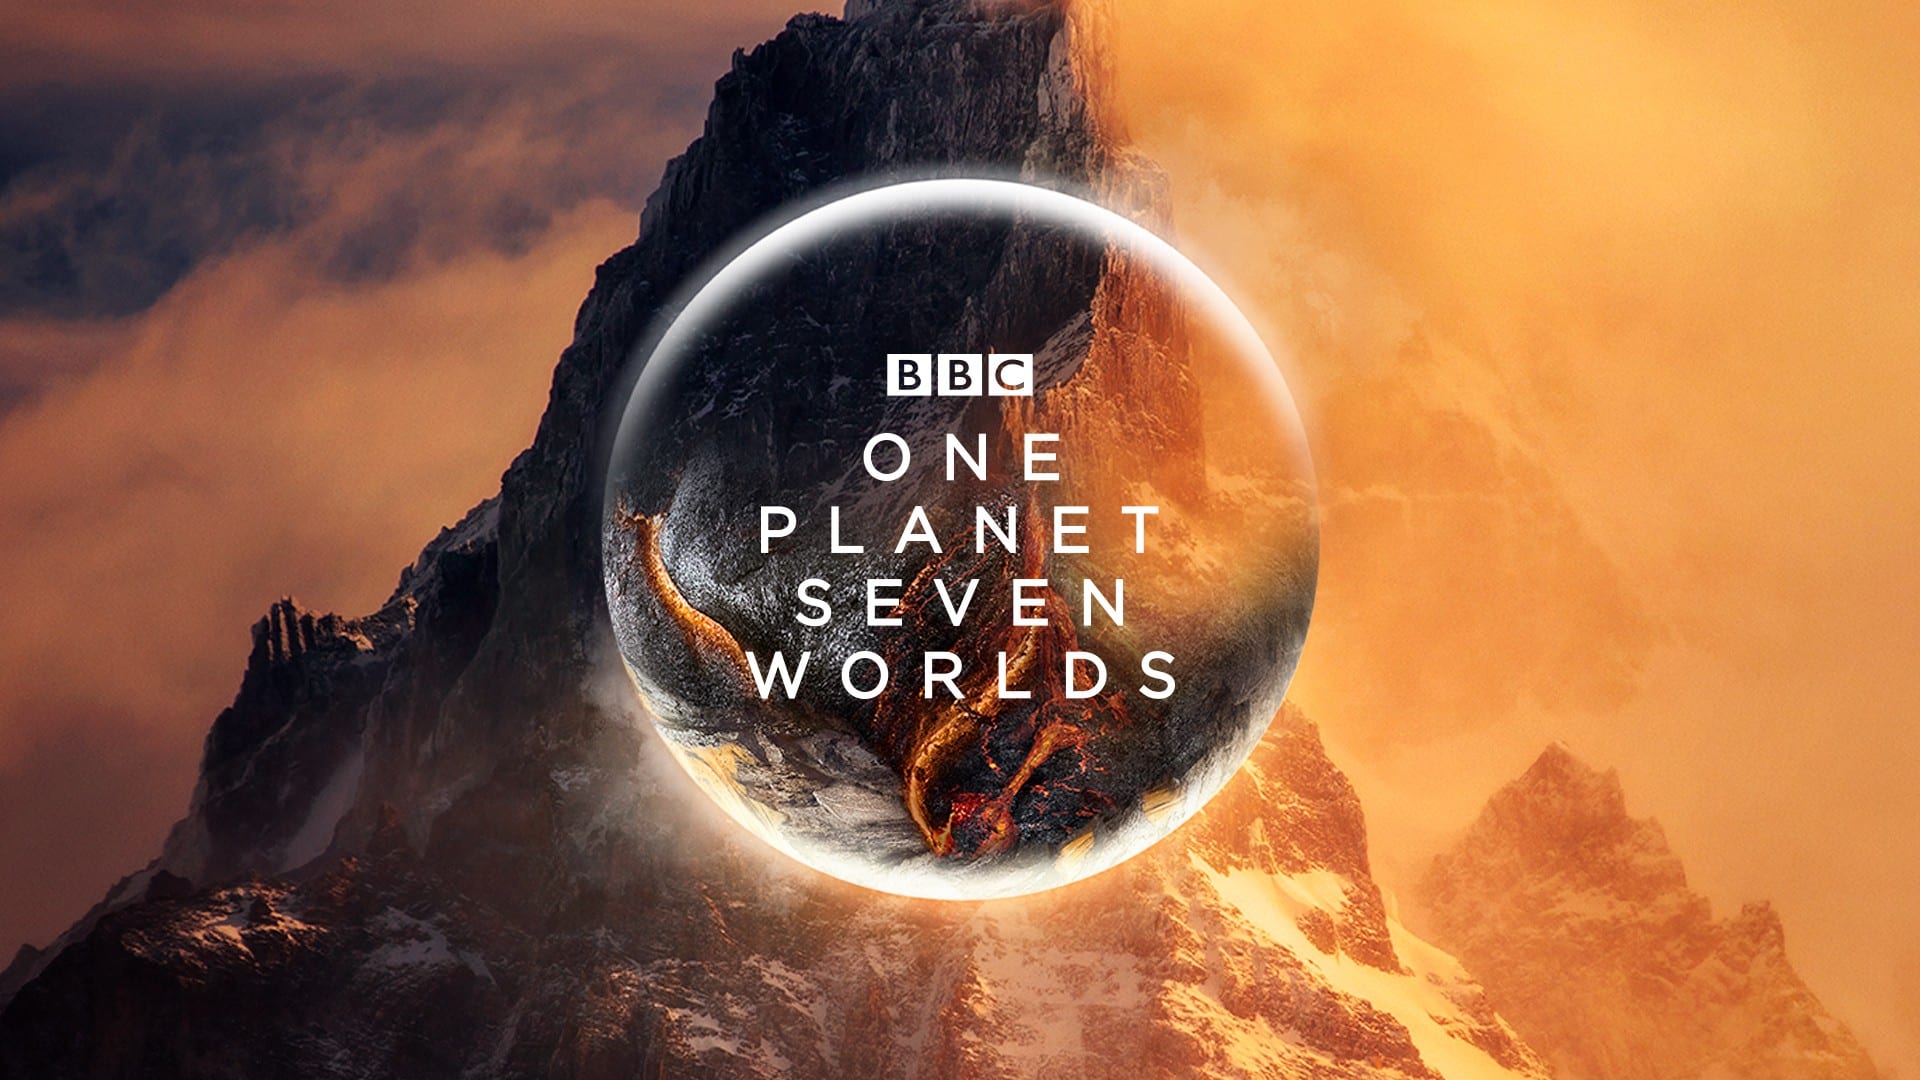 BBC Earth's New Project: One Planet Seven Worlds Release Date